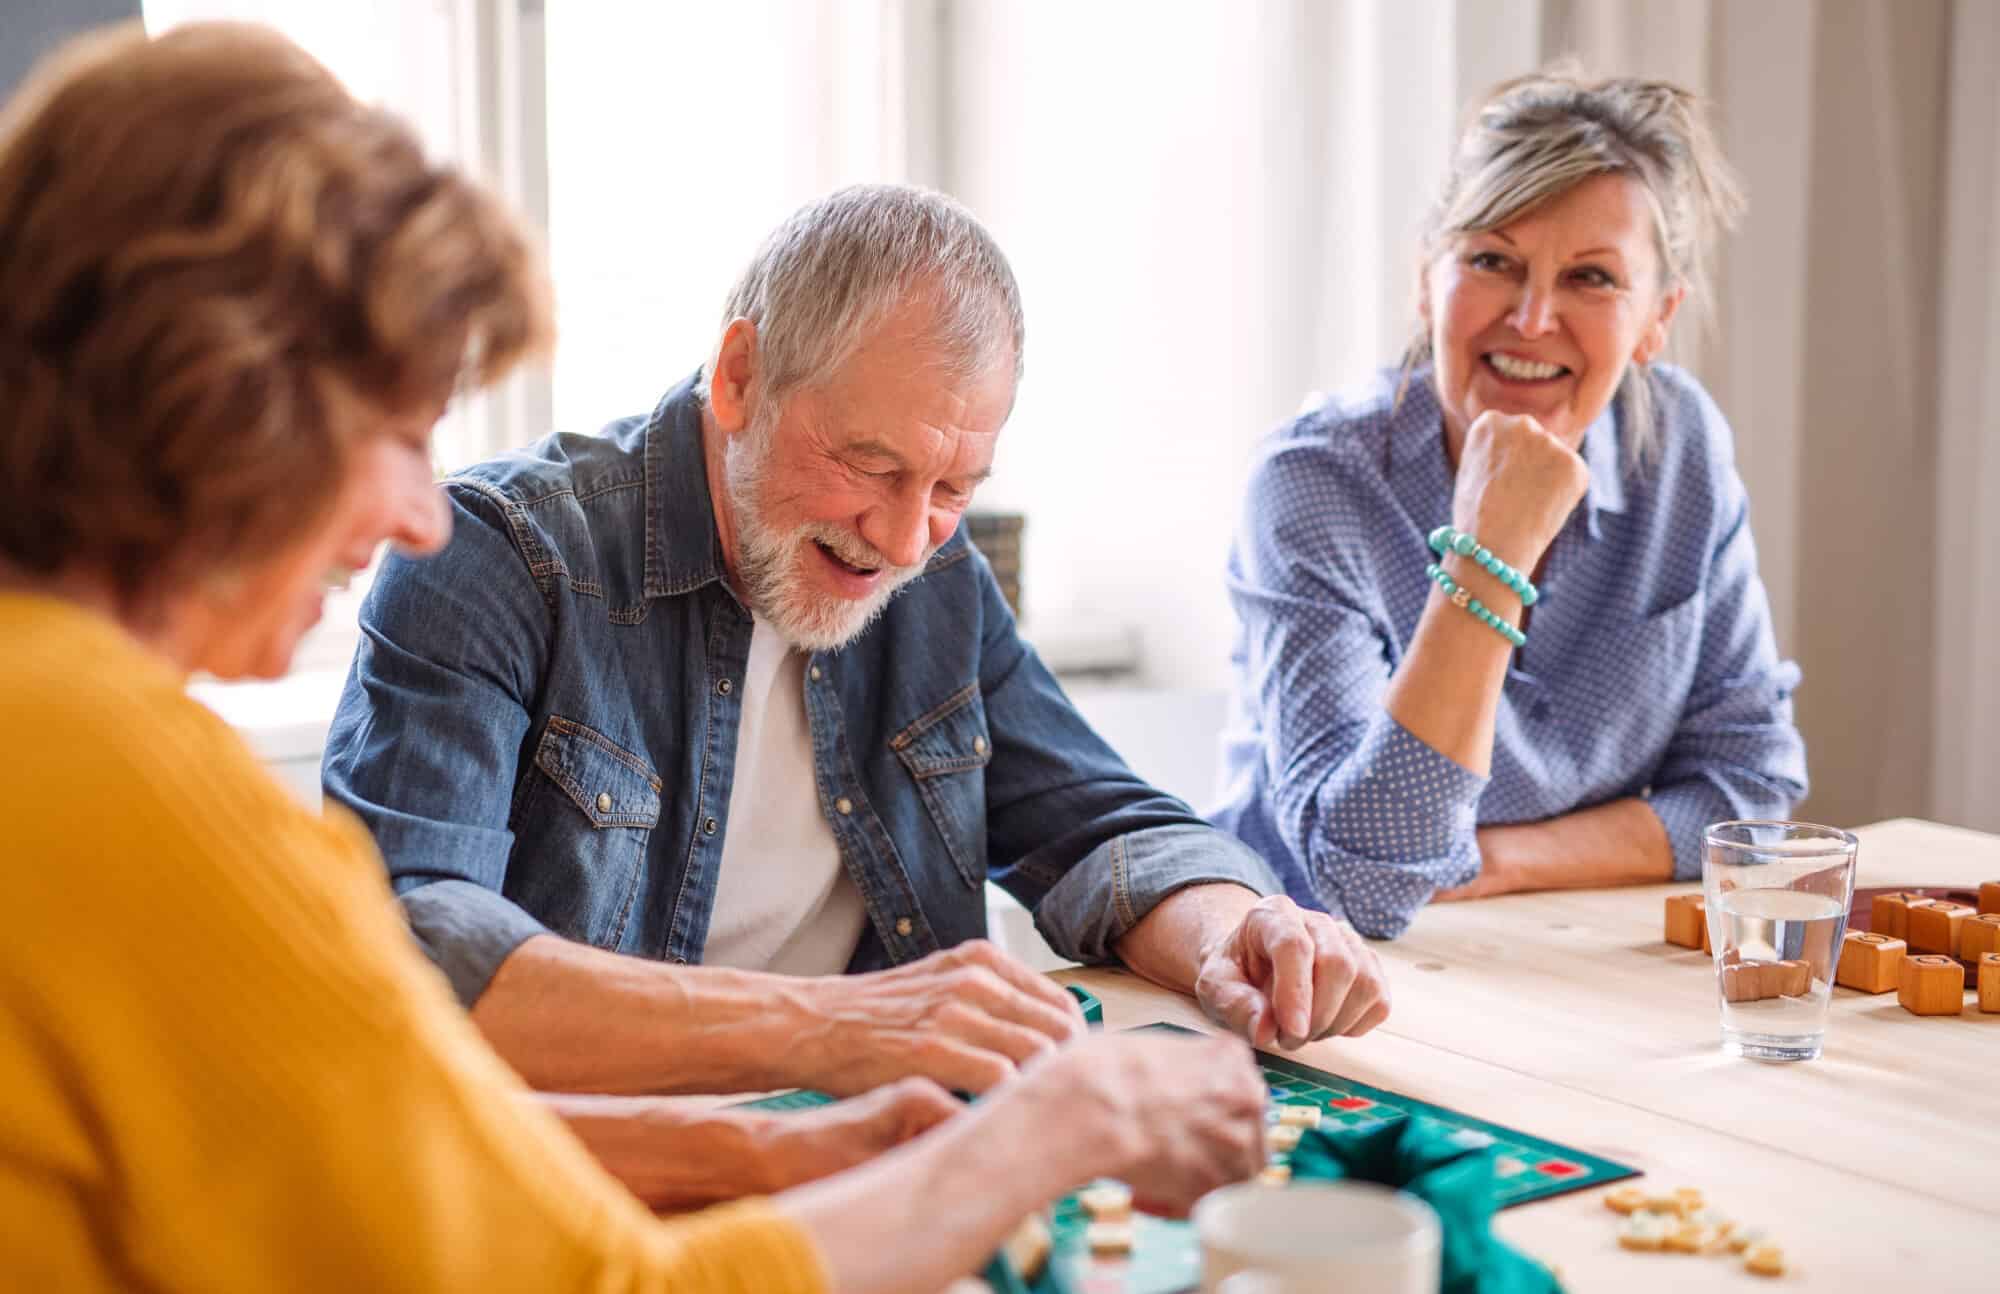 Group,Of,Senior,People,Playing,Board,Games,In,Community,Center